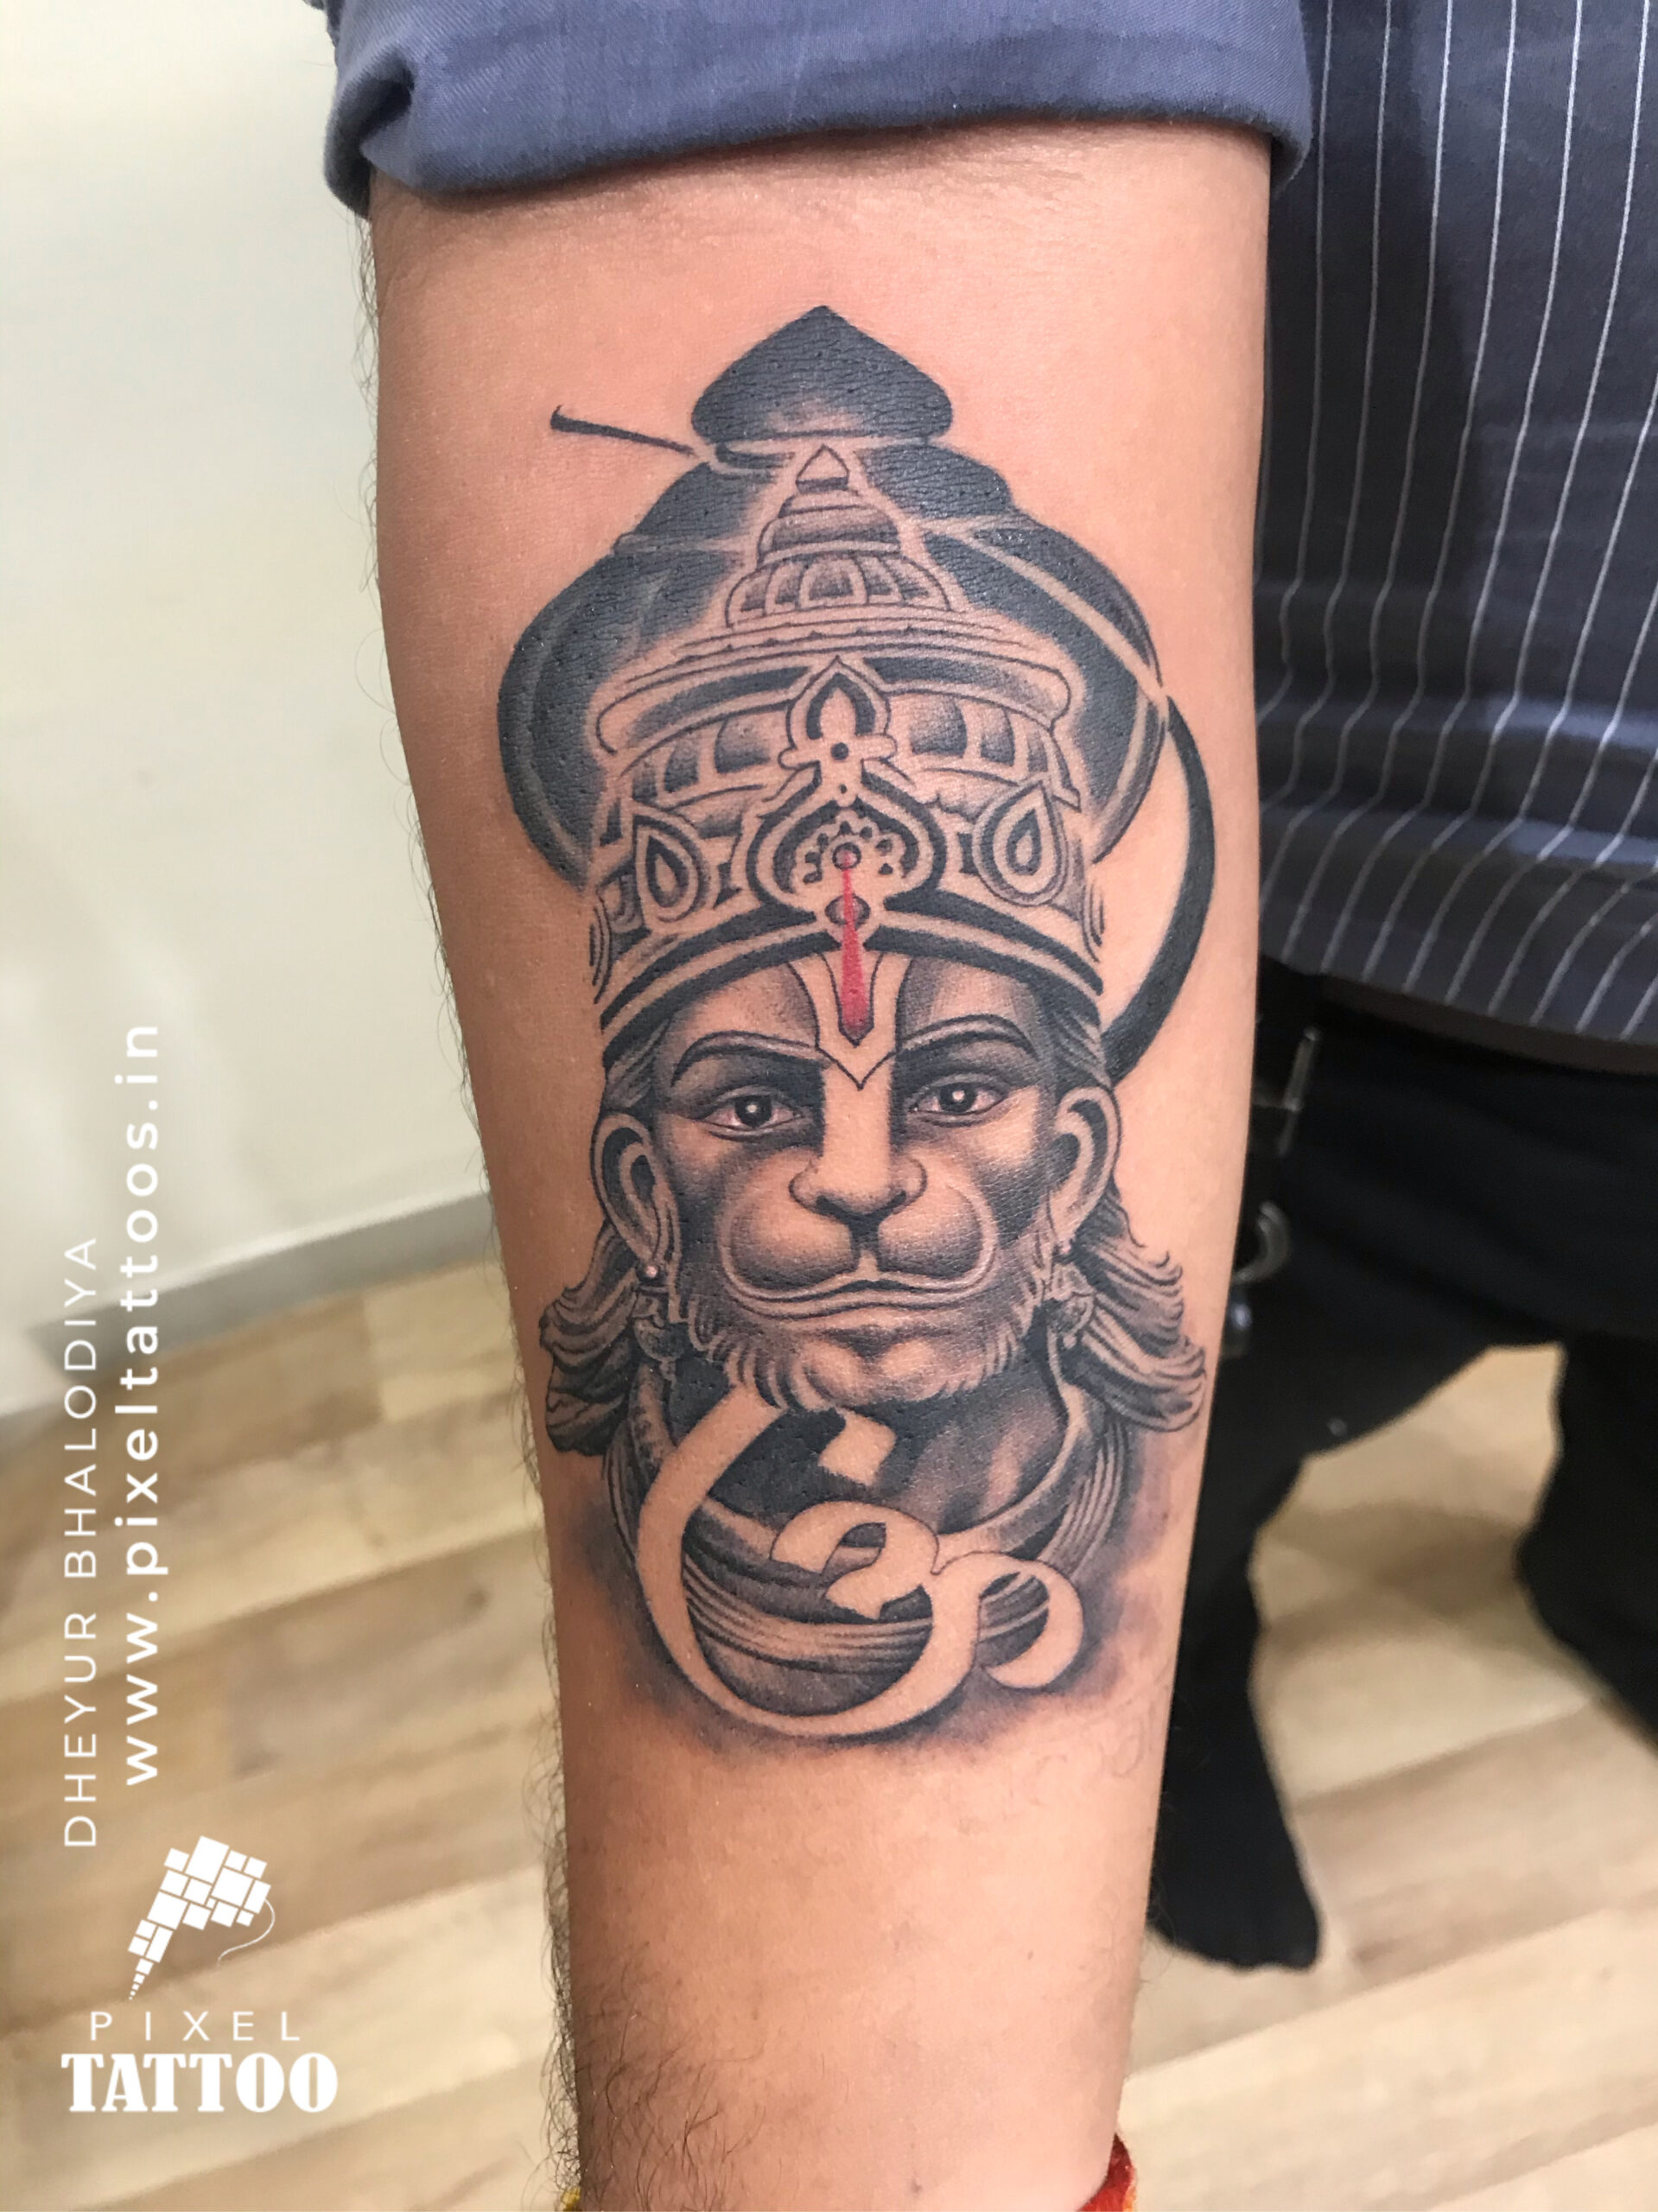 Session 1 of 2 of my ganesha from yesterday. Carlos Everhard - Octopus Ink,  Mcallen TX. : r/tattoos